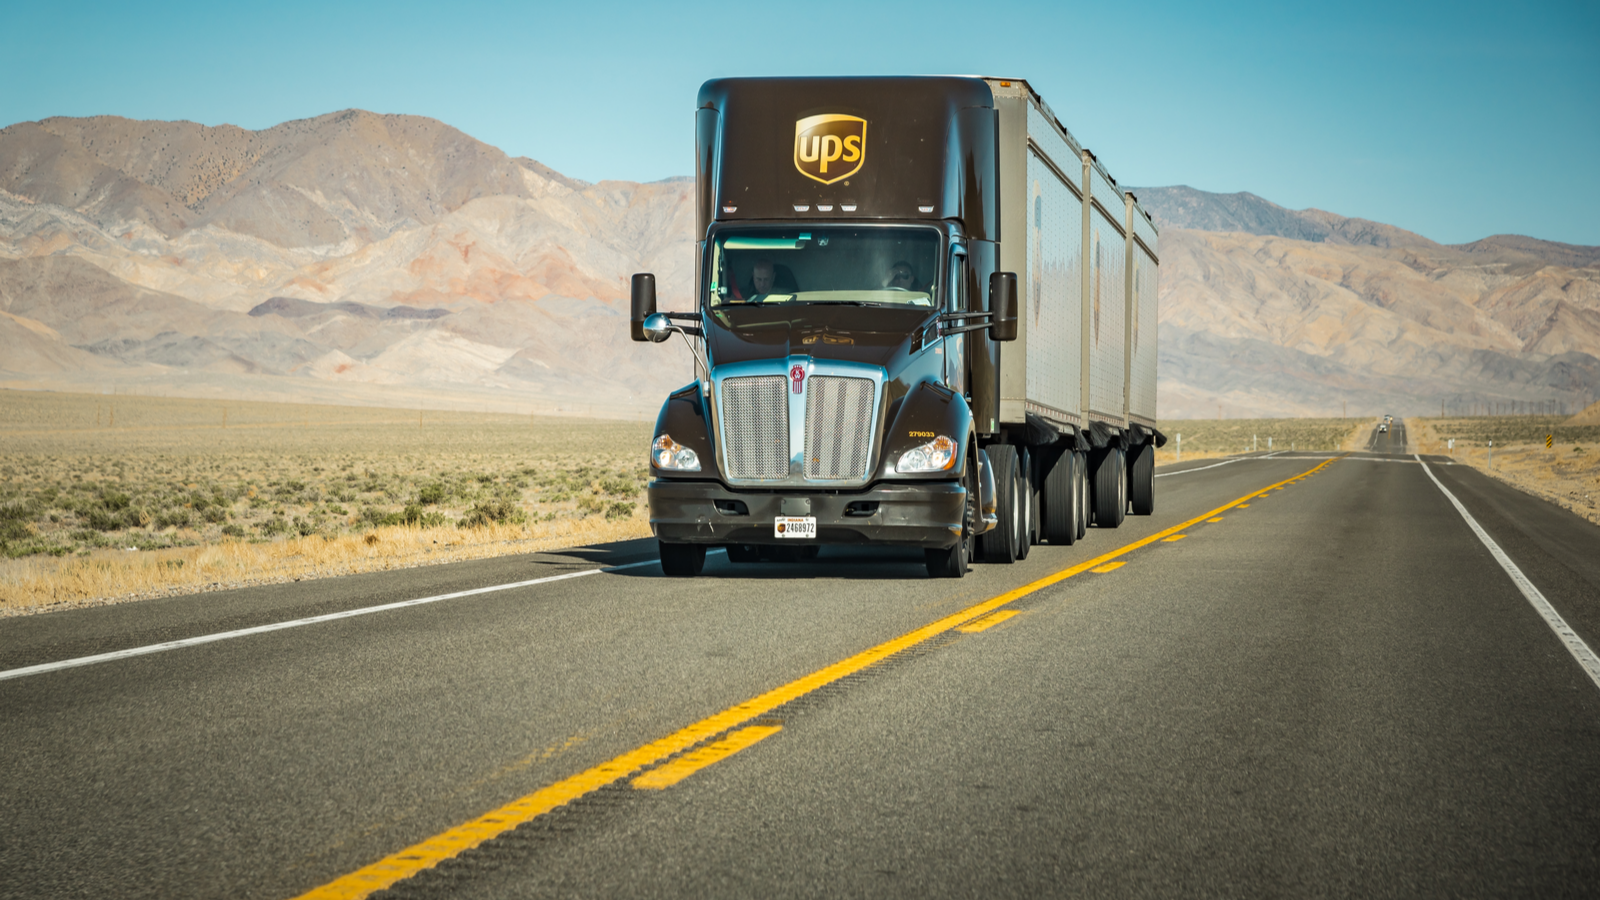 United Parcel Service (UPS) truck on Interstate in the American West. UPS stock.